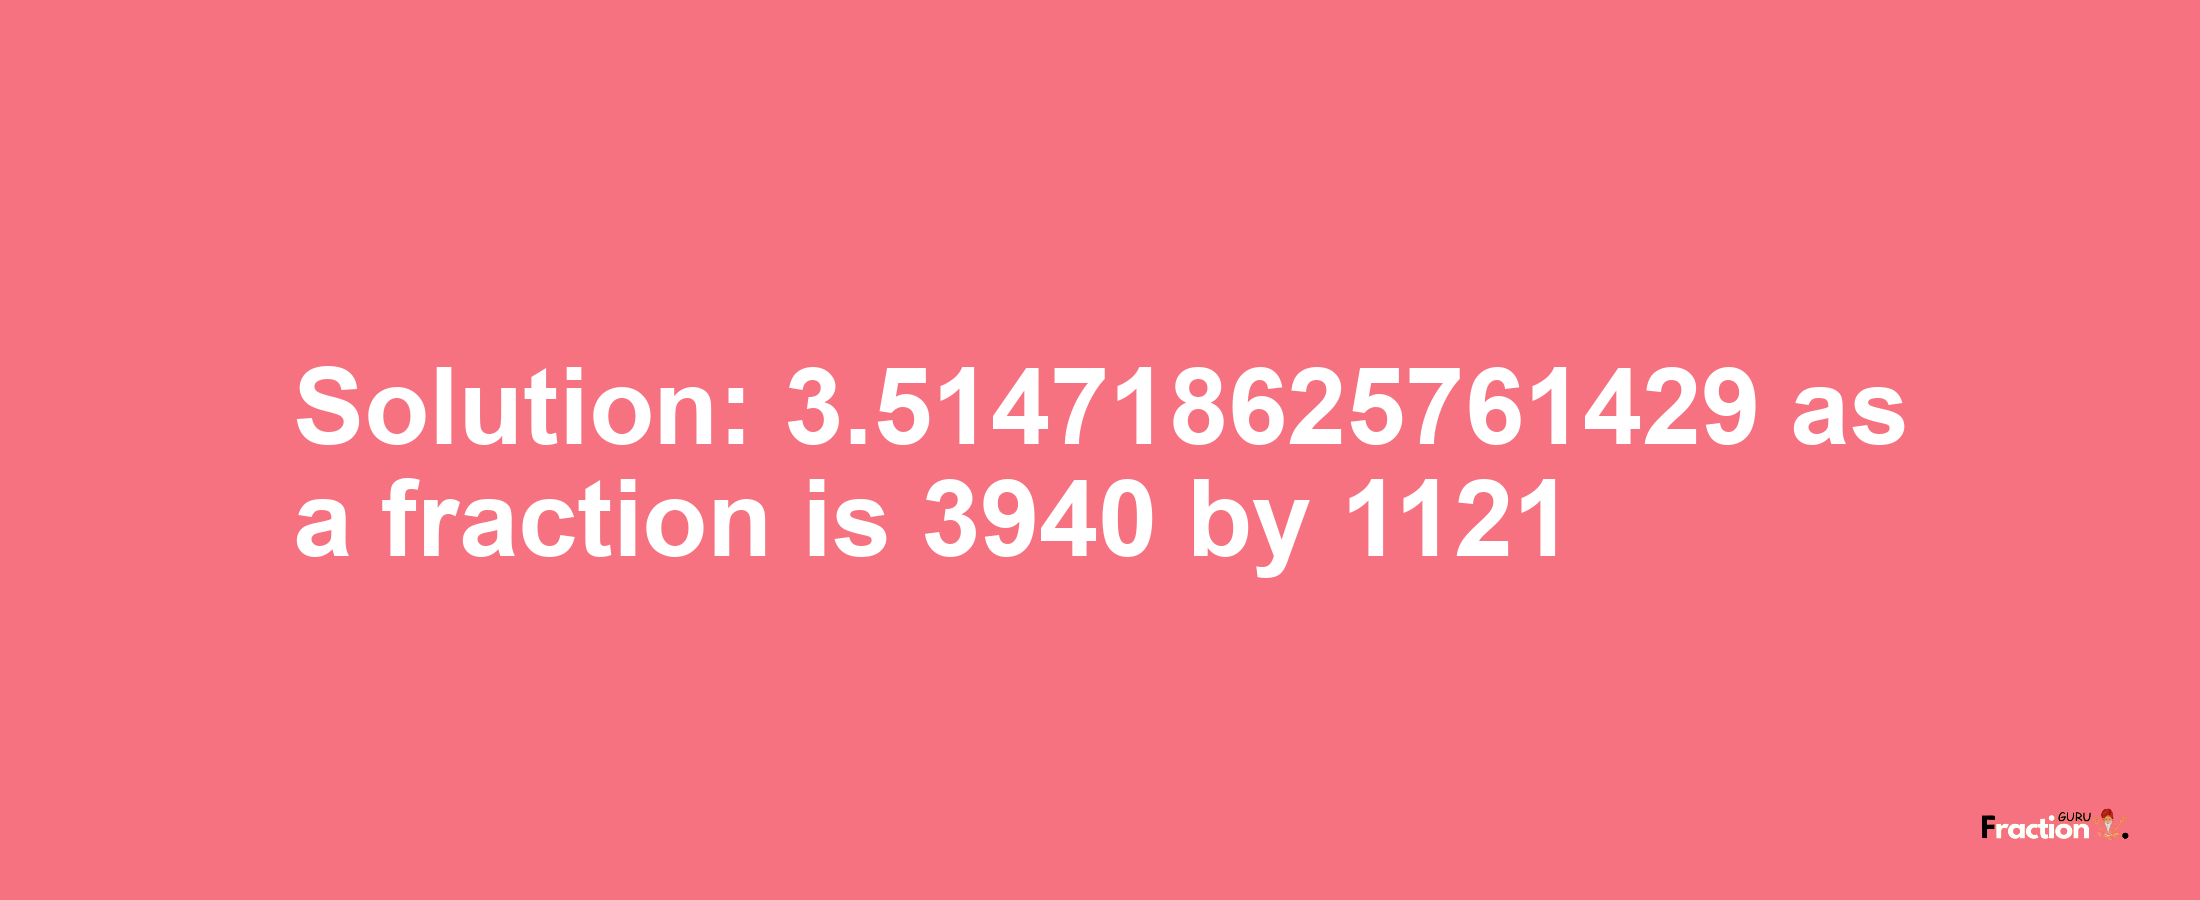 Solution:3.514718625761429 as a fraction is 3940/1121